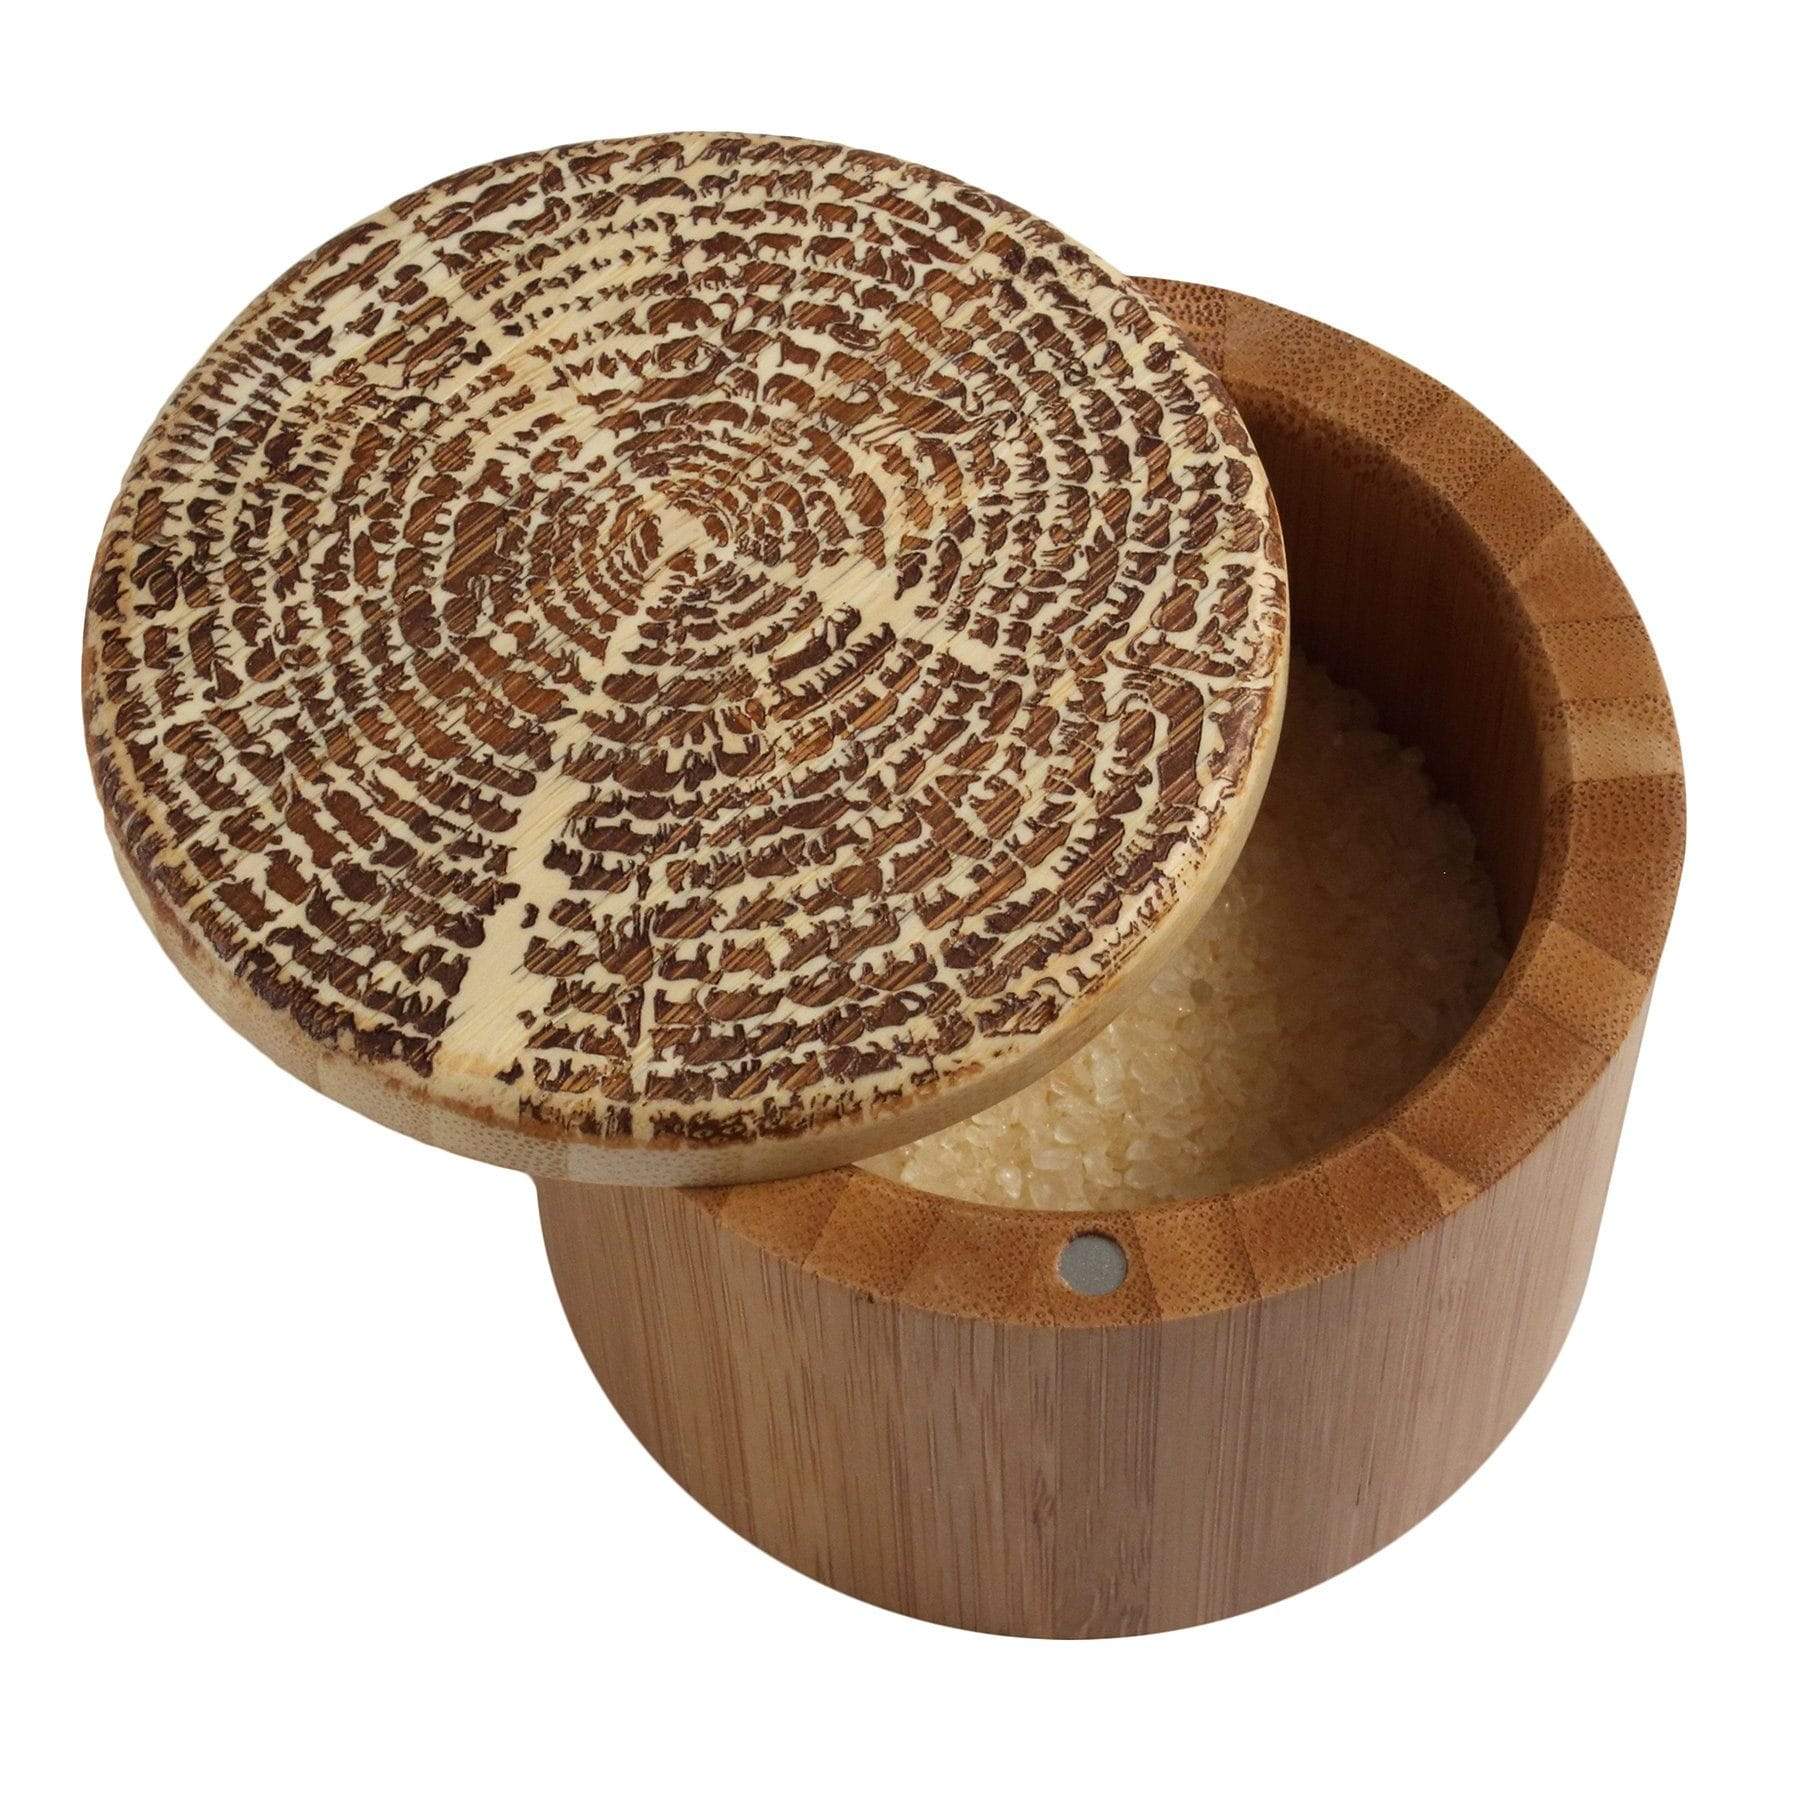 Totally Bamboo Salt Box with Magnetic Swivel Lid, "Tree of Life" Engraving on Lid